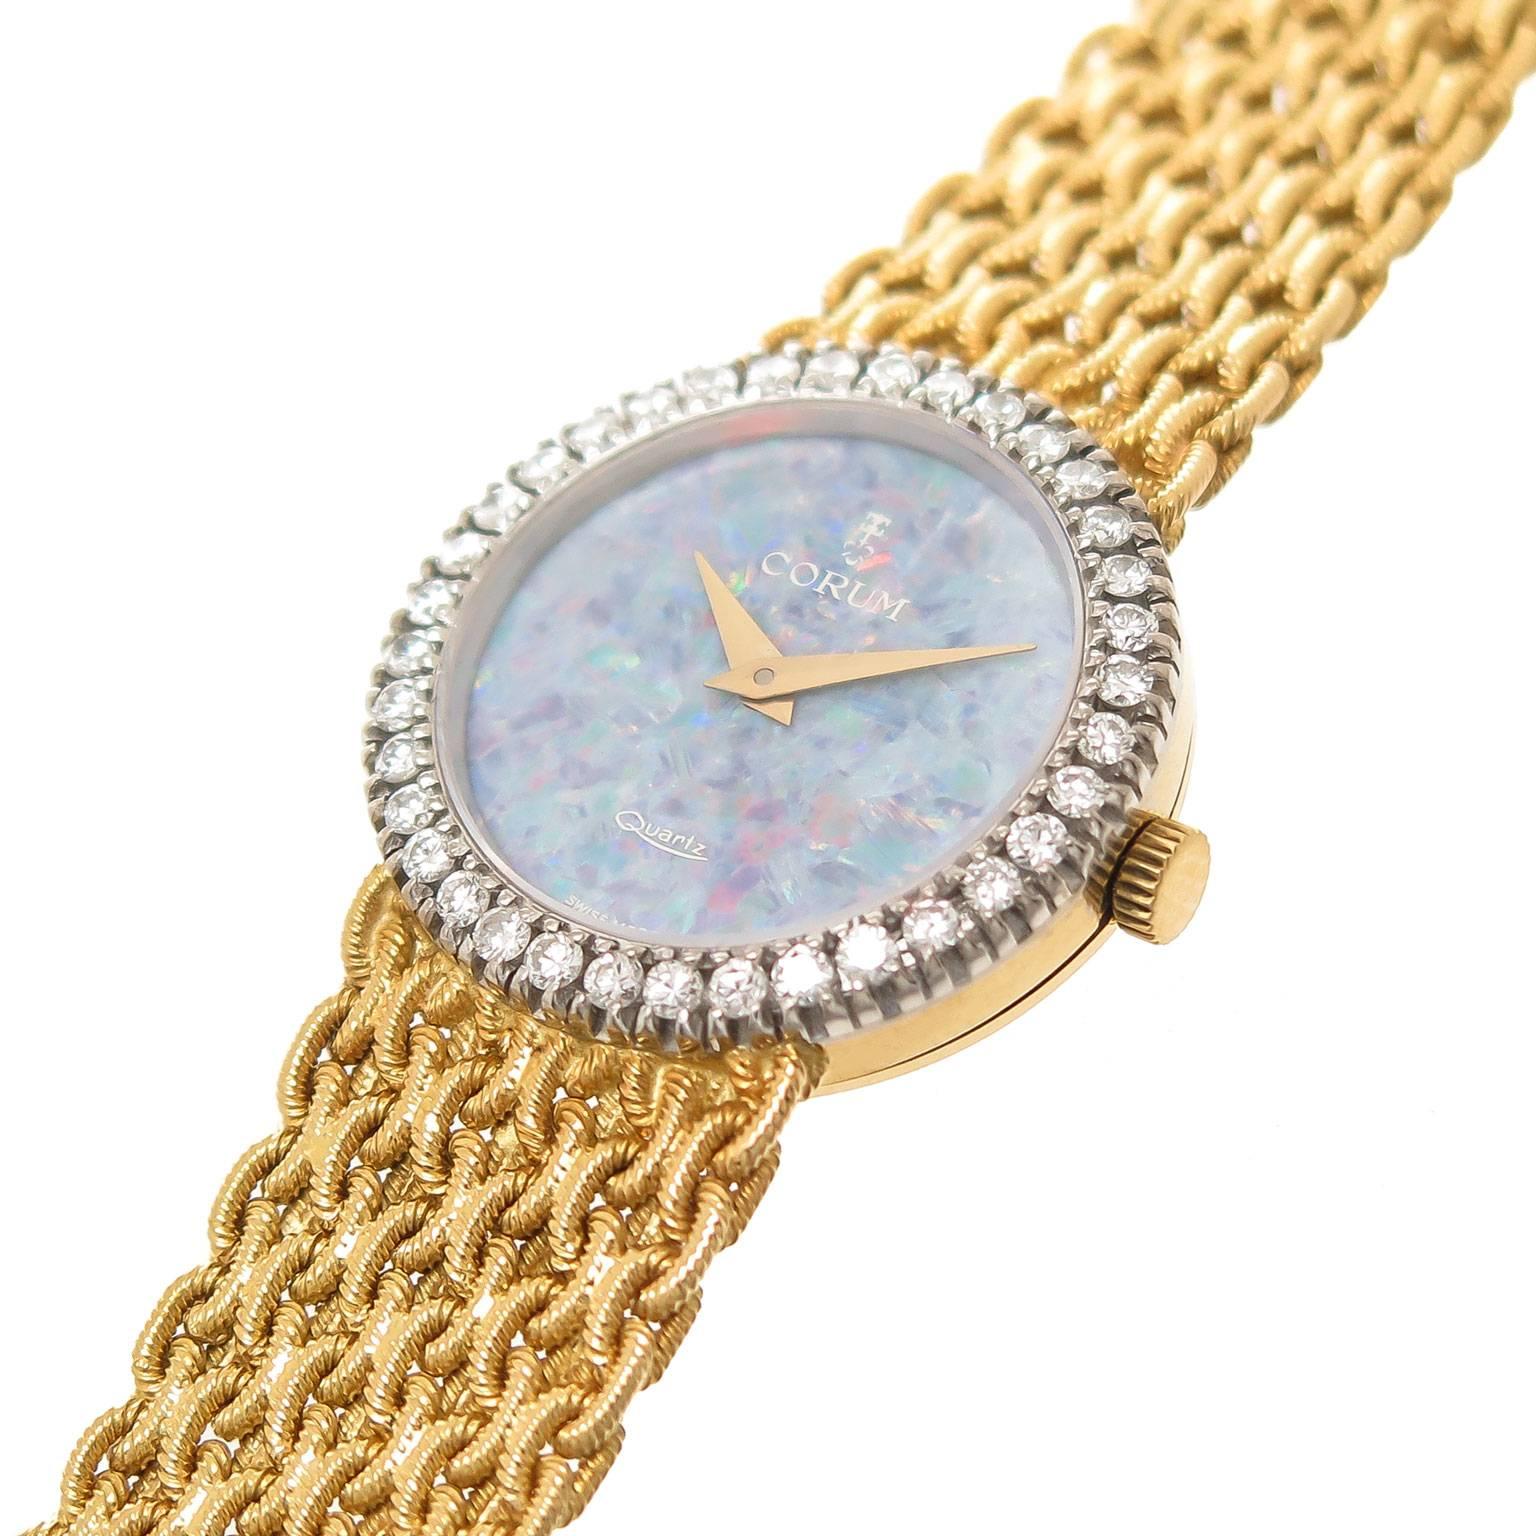 Circa 1980s Corum 18K Yellow Gold Ladies Watch, 24 MM diameter case with a White Gold bezel set with round Brilliant cut Diamonds totaling .70 Carat, quartz movement, Fire Opal face with yellow Gold hands. Woven link Corum Bracelet measuring 5/8